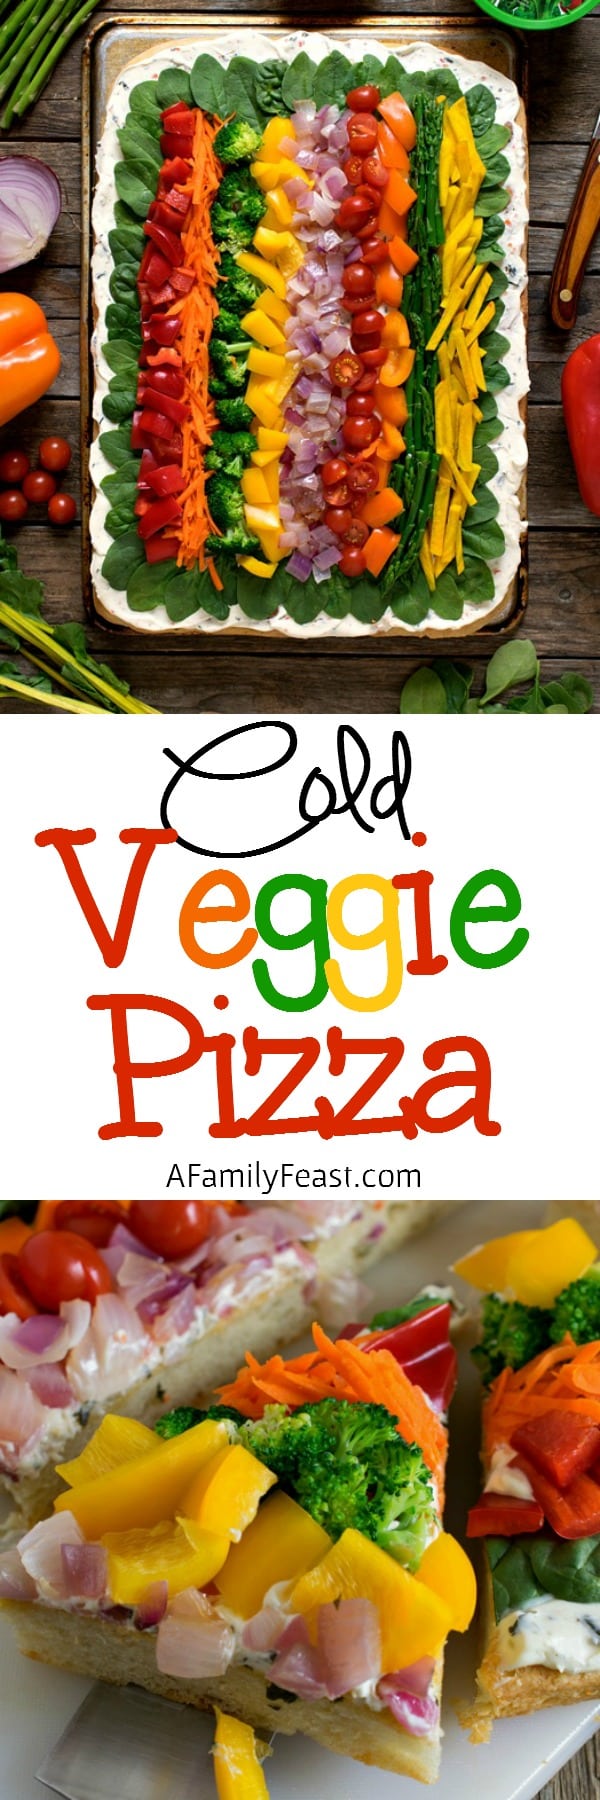 Cold Veggie Pizza - A Family Feast